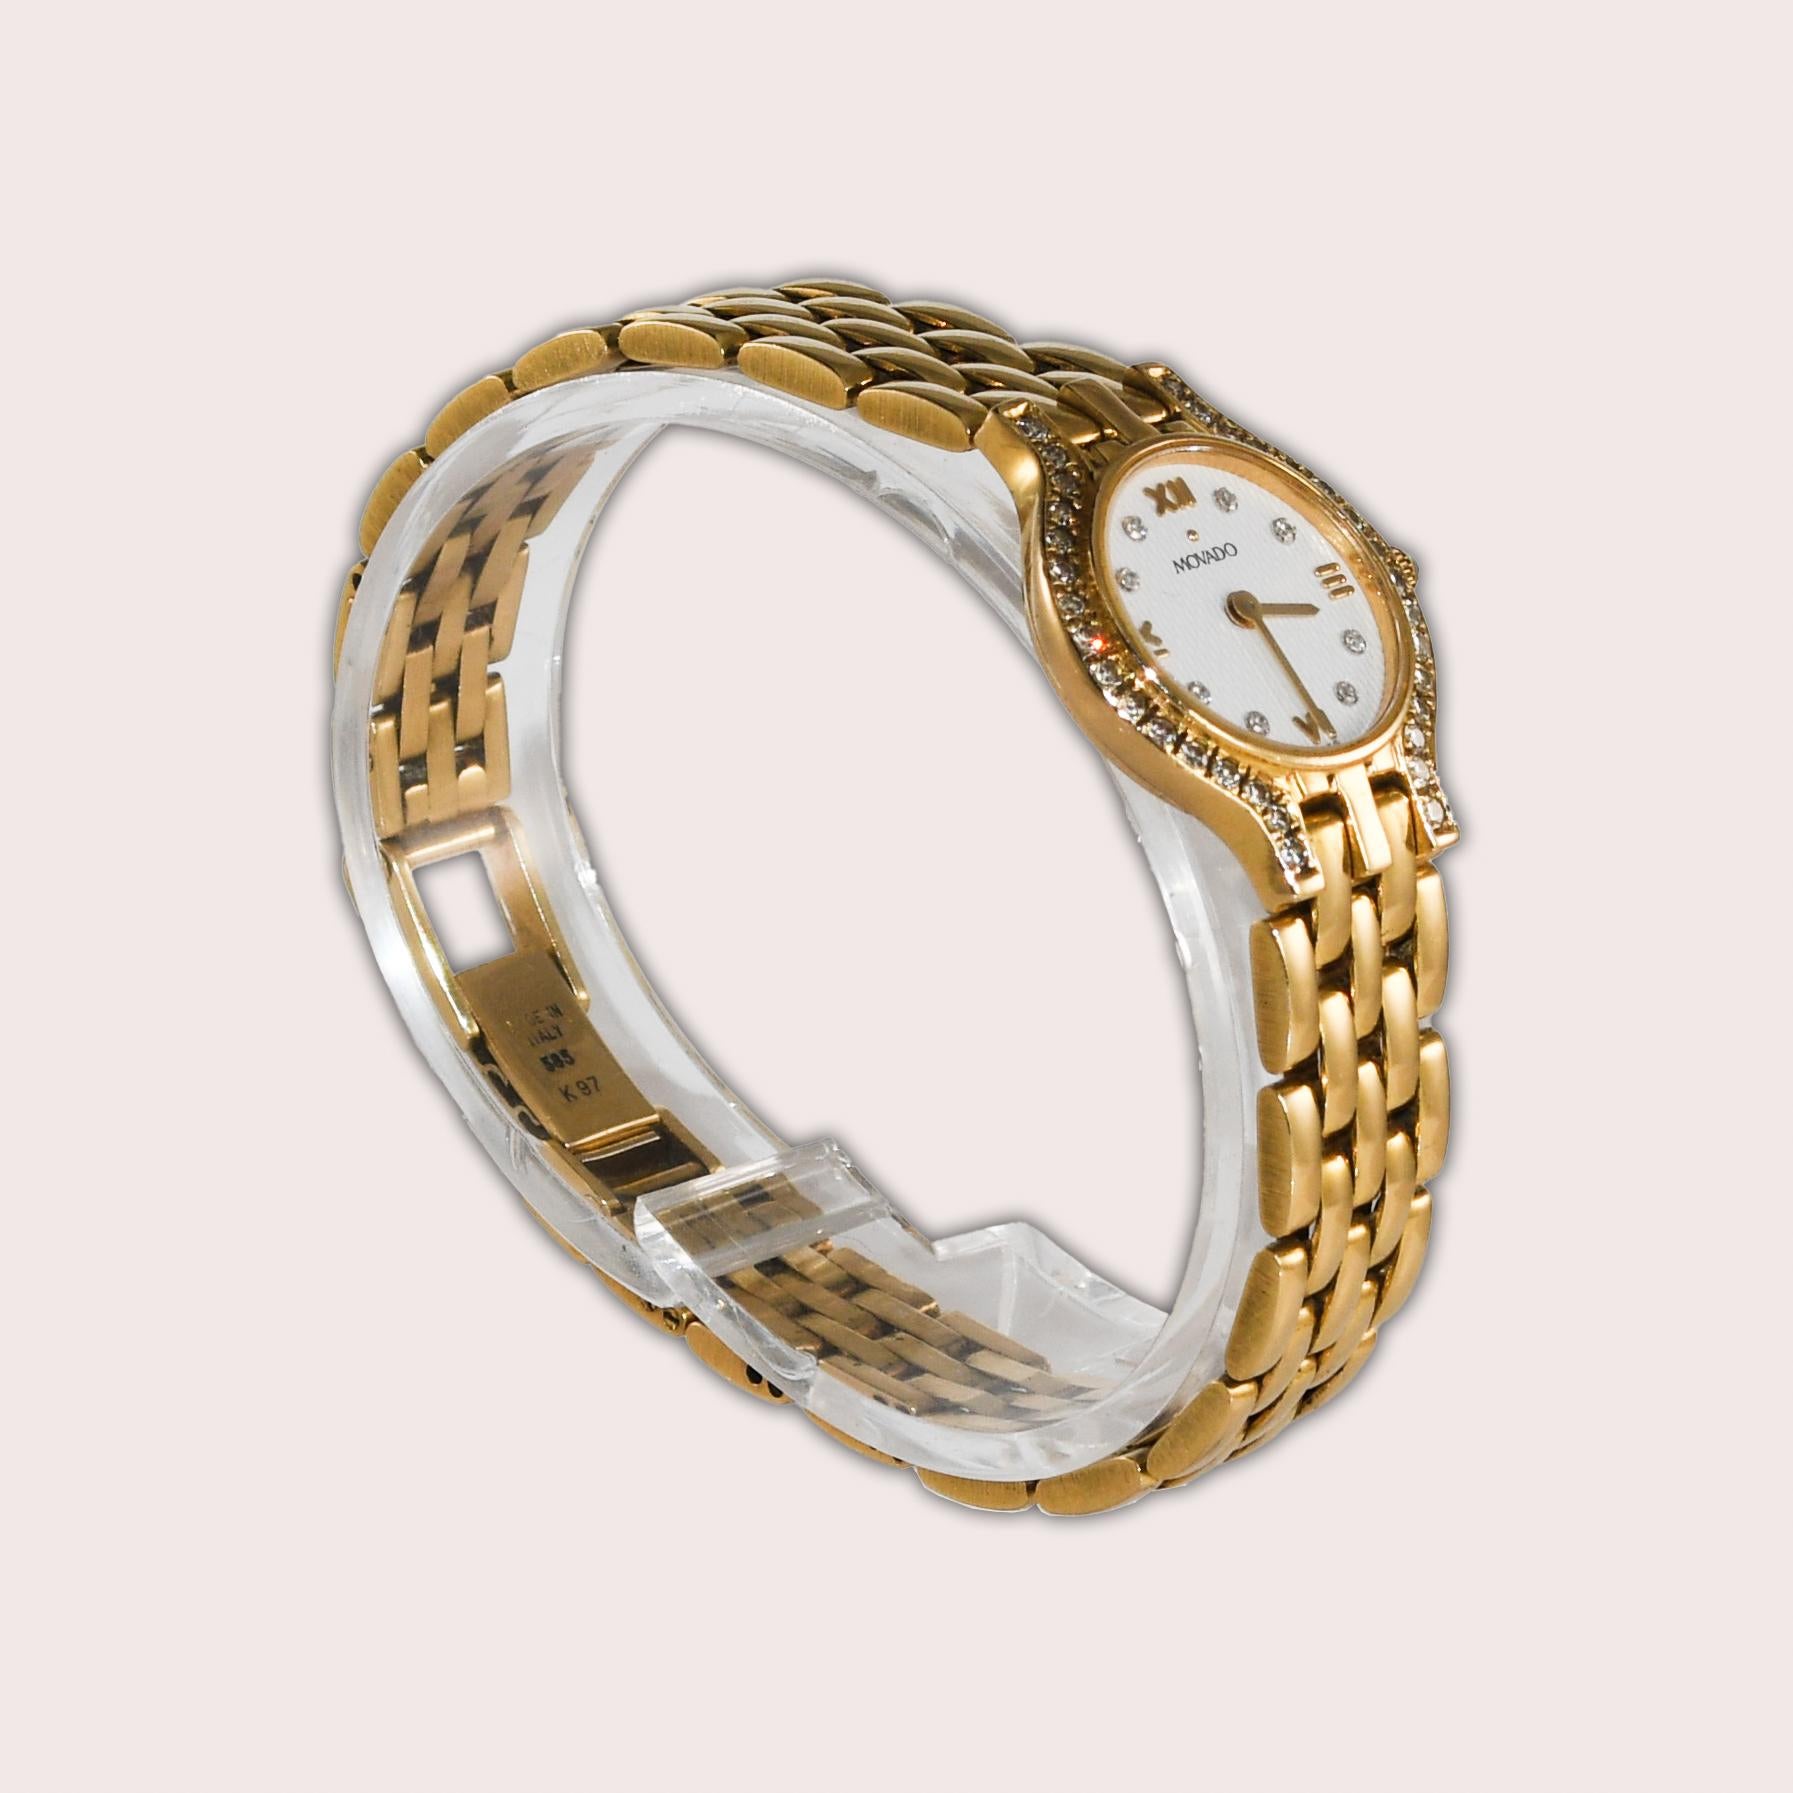 Ladies 14k yellow gold Movado watch with diamond bezel and dial.
Stamped 14k and the back case. 
The case size is 20mm wide. 
The gross weight is 33 grams.
The quartz movement has a new battery and keeps good time.
Single-cut diamonds on the bezel